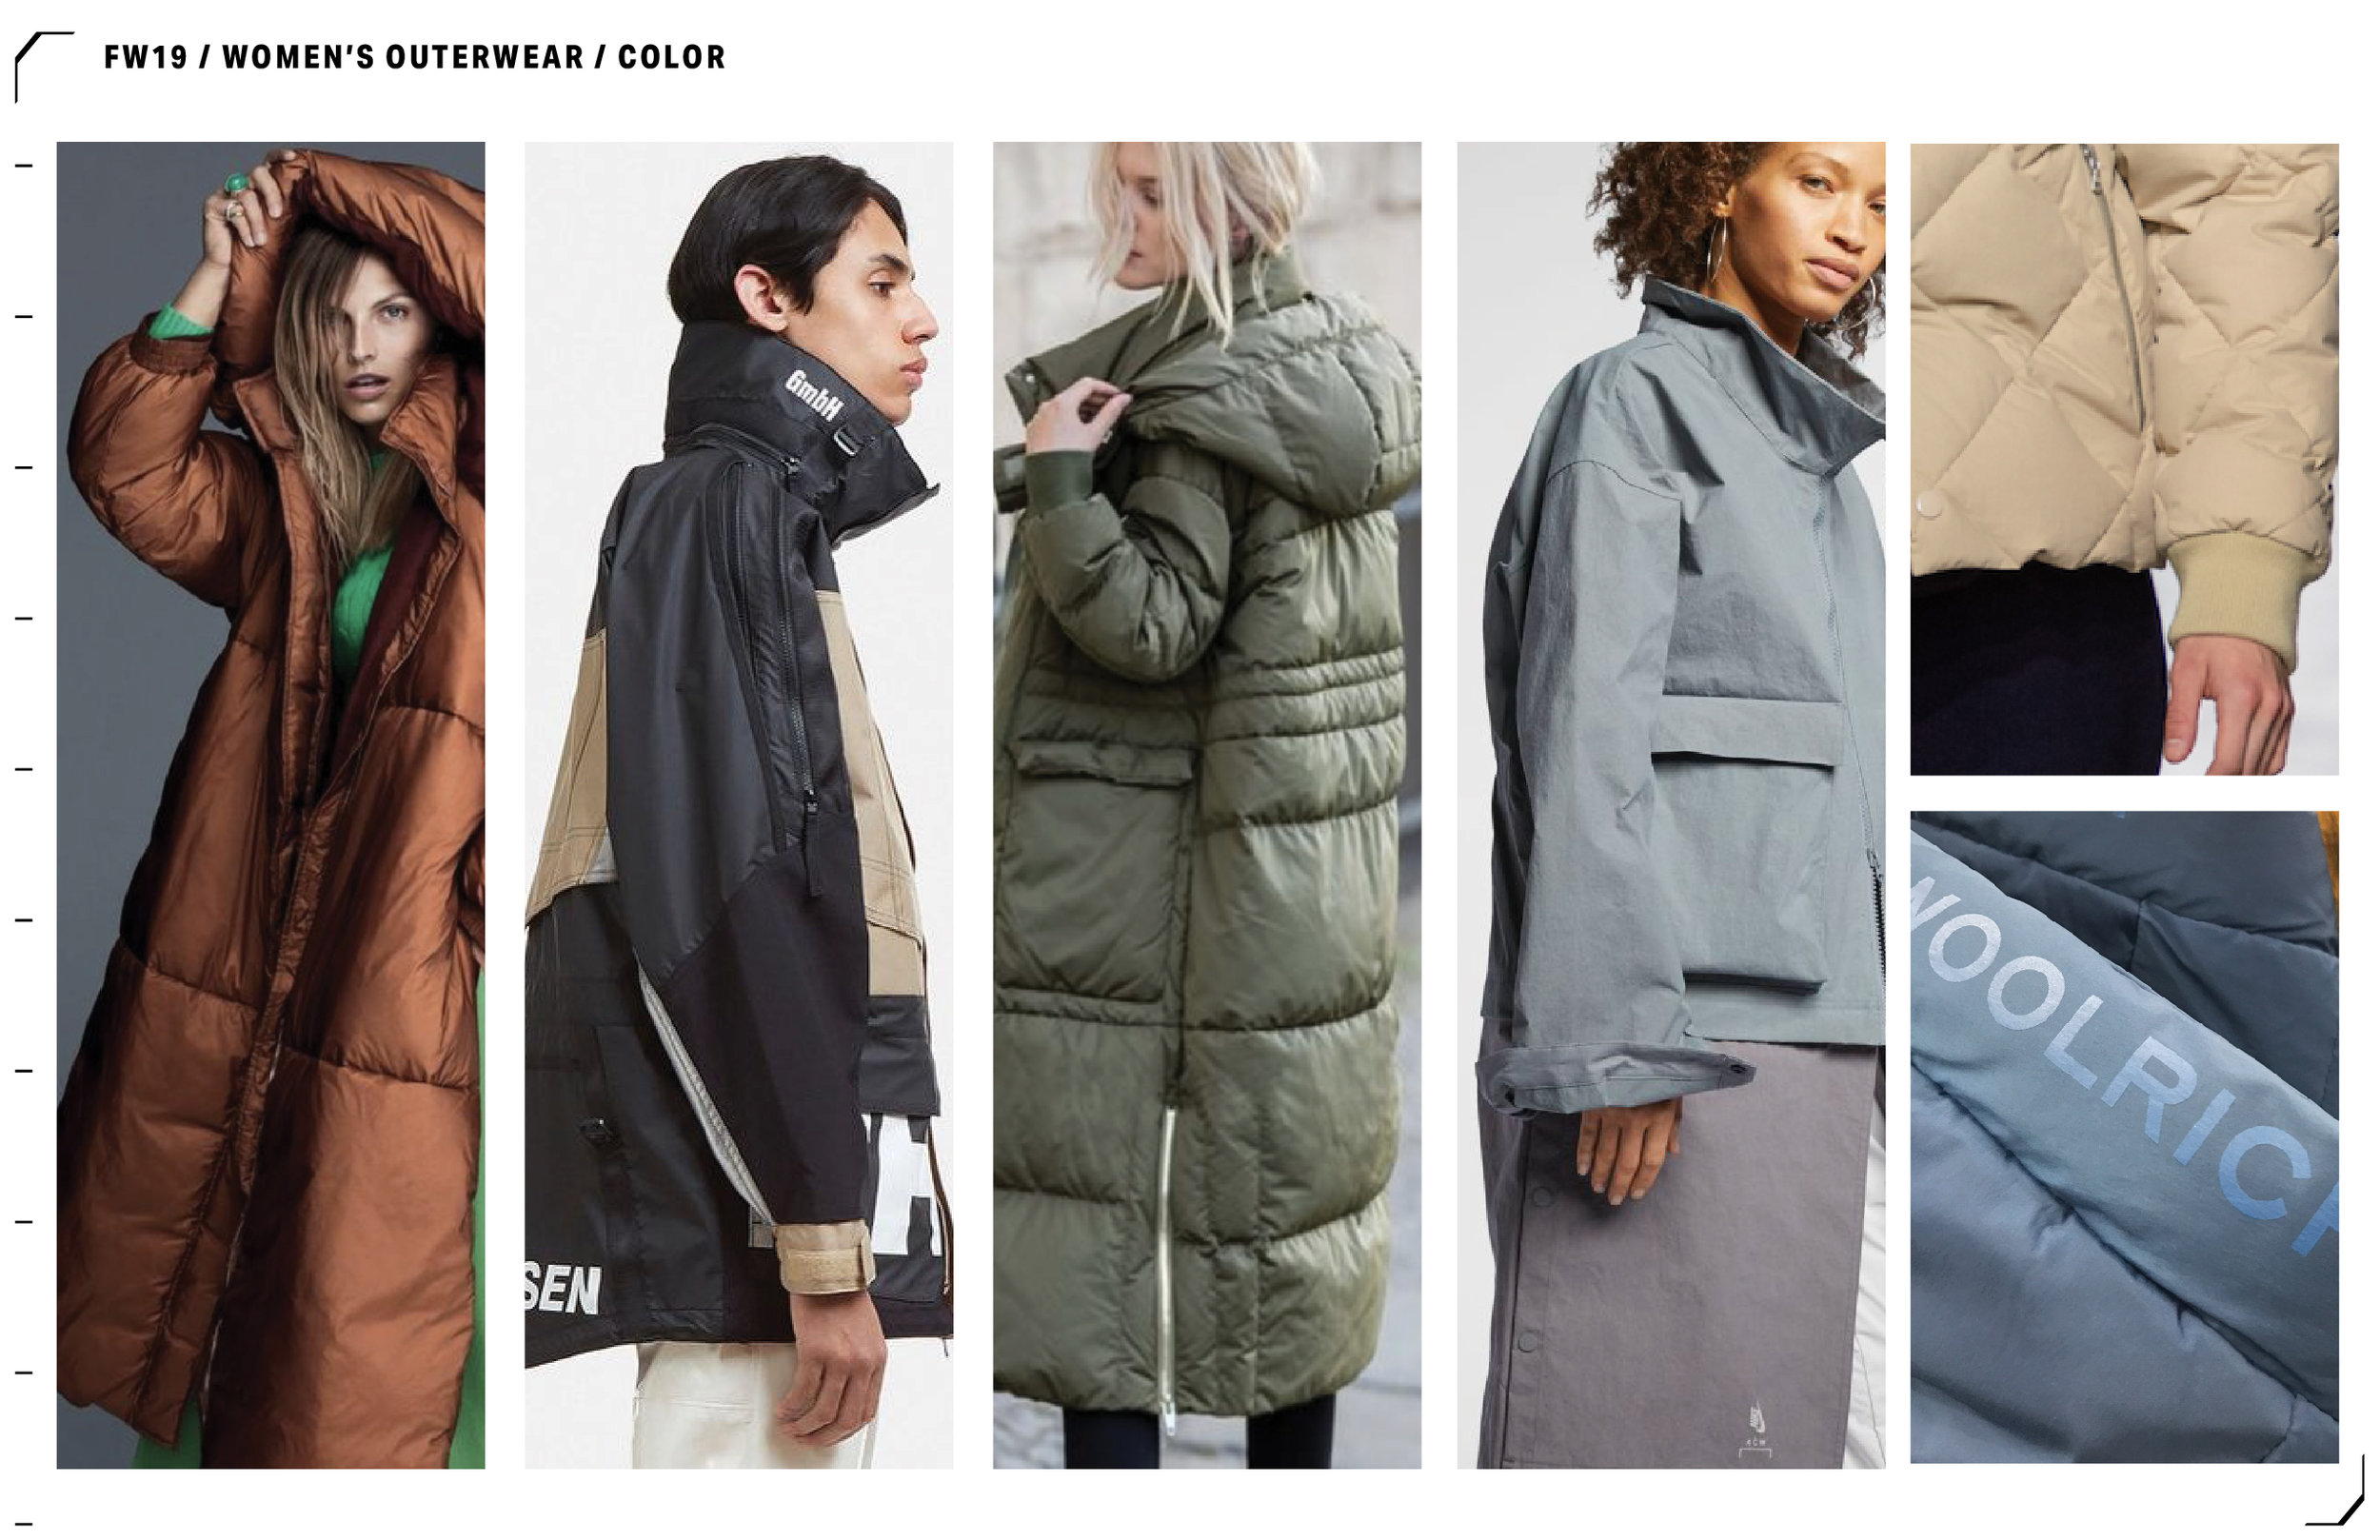 OUTERWEAR OVERVIEW PAGES WEBSITE-03.jpg